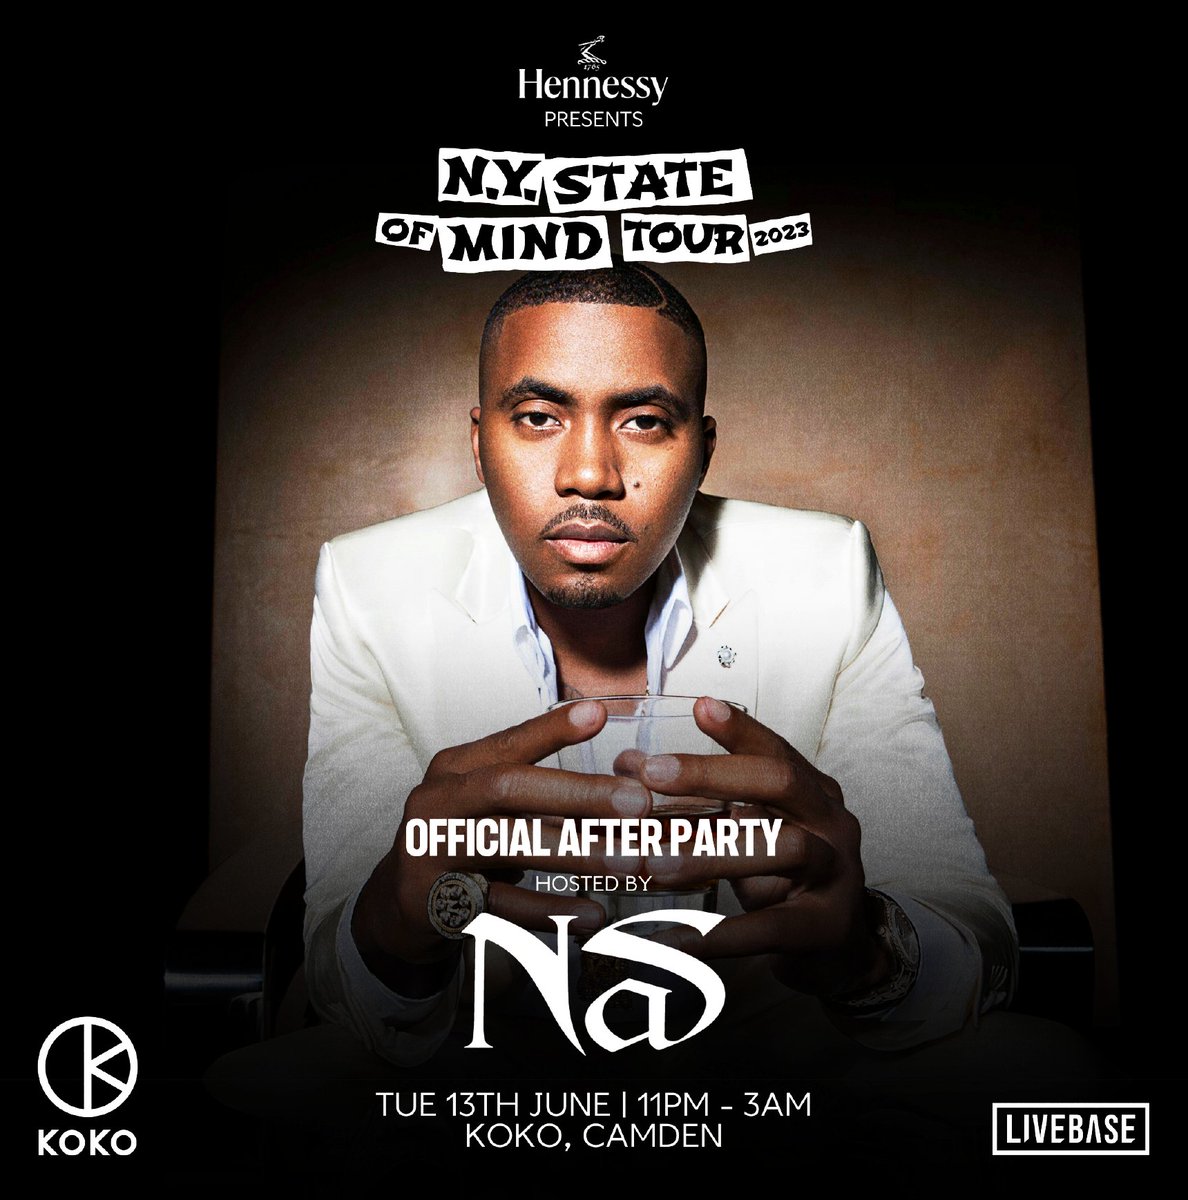 ON SALE NOW: #KOKO and @Hennessy
celebrate 50 years of hip hop with the official ‘N.Y. State of Mind’ afterparty, hosted by @Nas. 

Tickets here: bit.ly/3MQbmnS